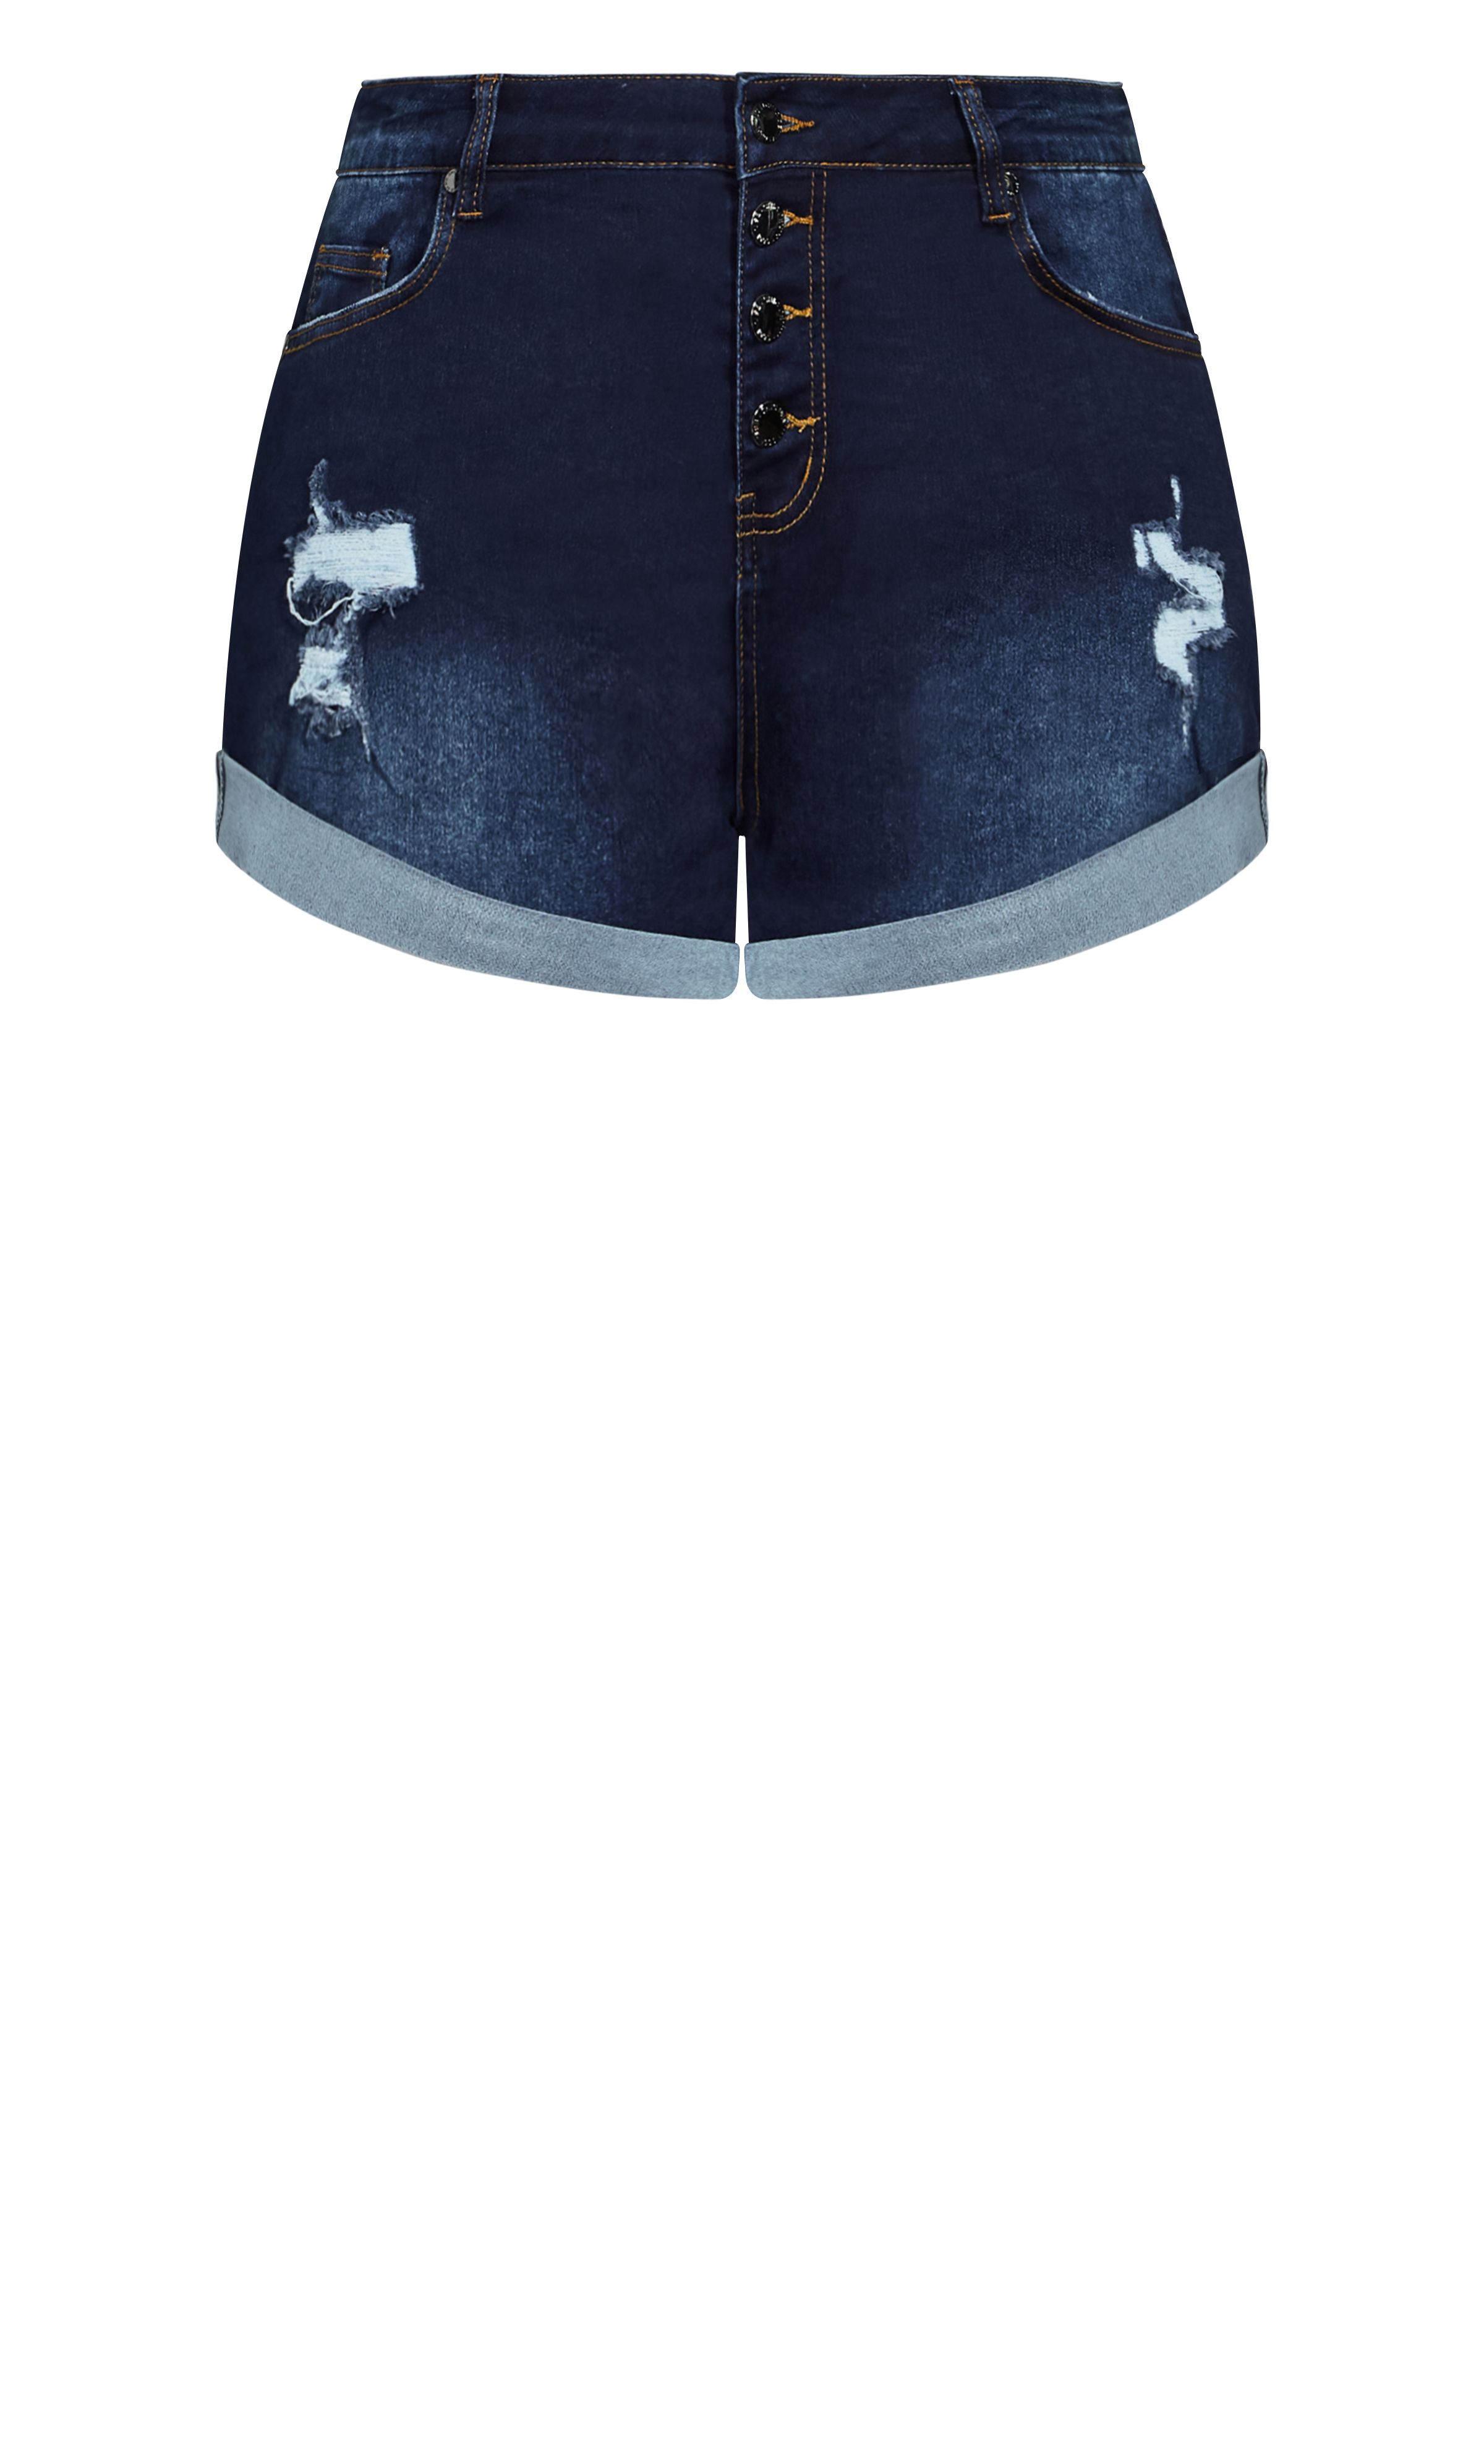 Reinforce the backbone of your wardrobe with the beautiful Denim Cuff Shorts. These shorts feature a quad-button front closure, trendy distressed detailing, cuffed hemlines and a fabric construction made from a stretch denim fabrication which will fit your curves like a glove. Key Features Include: - Quad-button closure - Mid rise - Mid wash denim - Belt looped waistband - Classic 5 pocket denim styling - Distressed detailing - Stretch denim fabrication - Cuffed hemline Team these shorts with a distressed denim jacket and an oversized tee for a weekend-ready look.